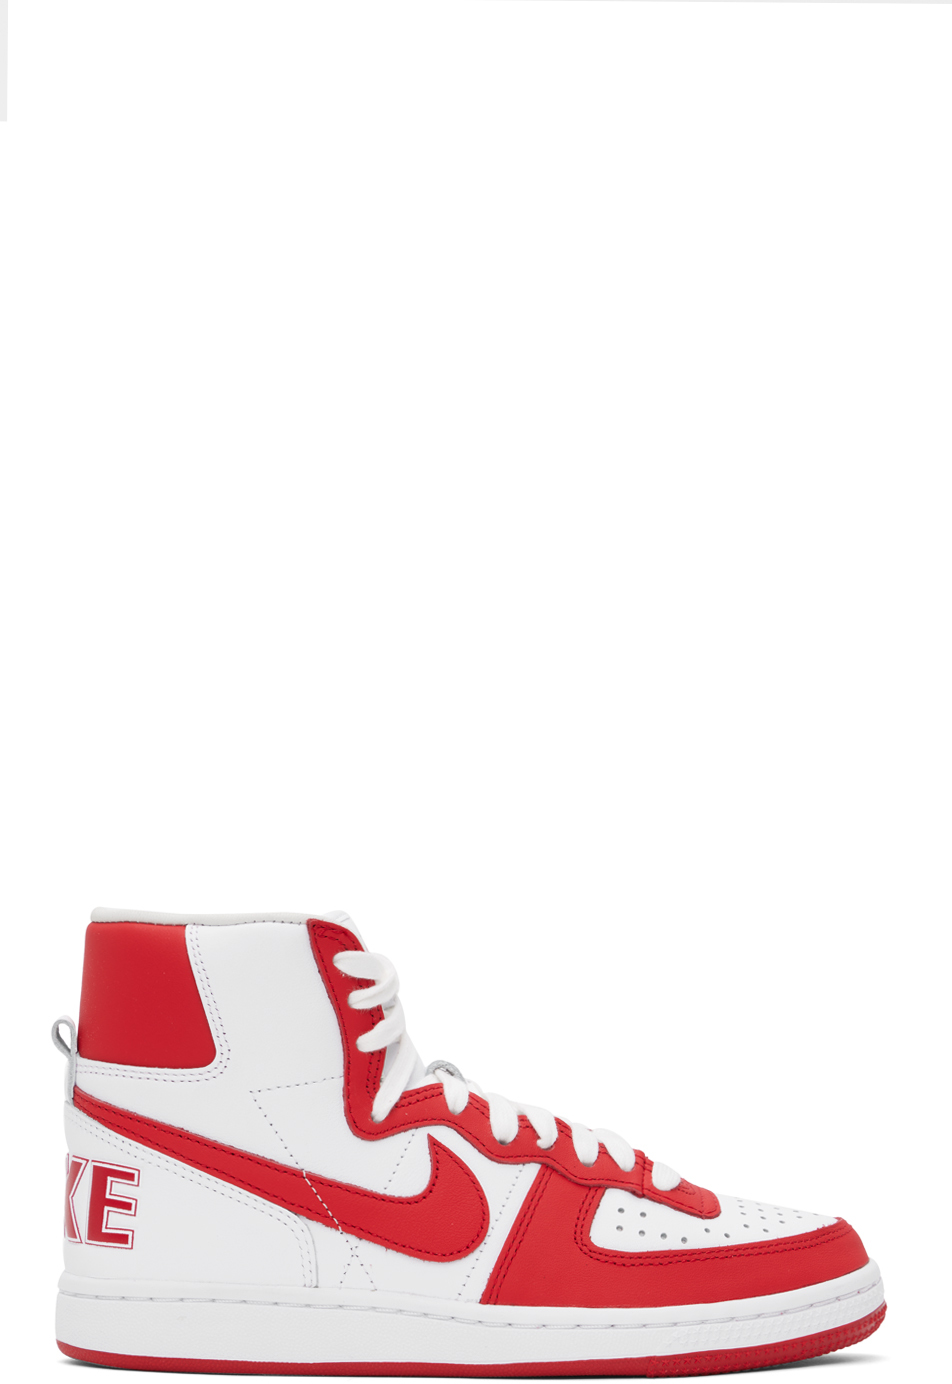 Red & White Nike Edition Terminator High Sneakers by Comme des